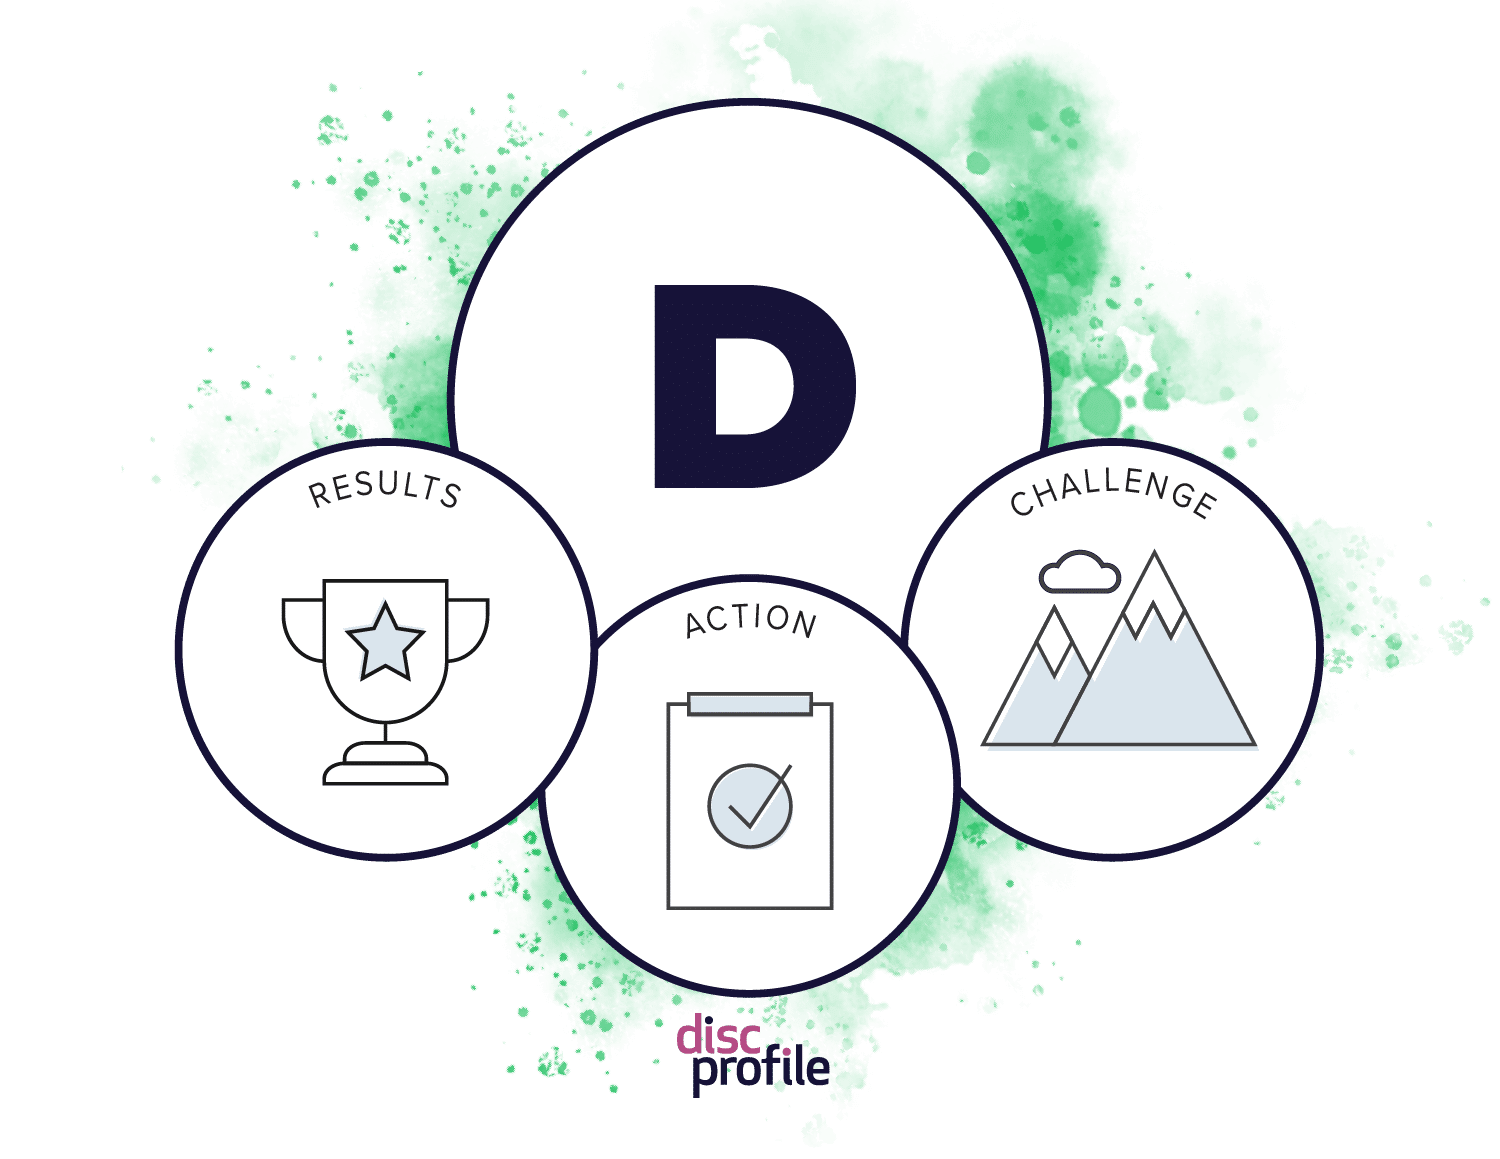 D style graphic showing the priorities of results, action, and challenge